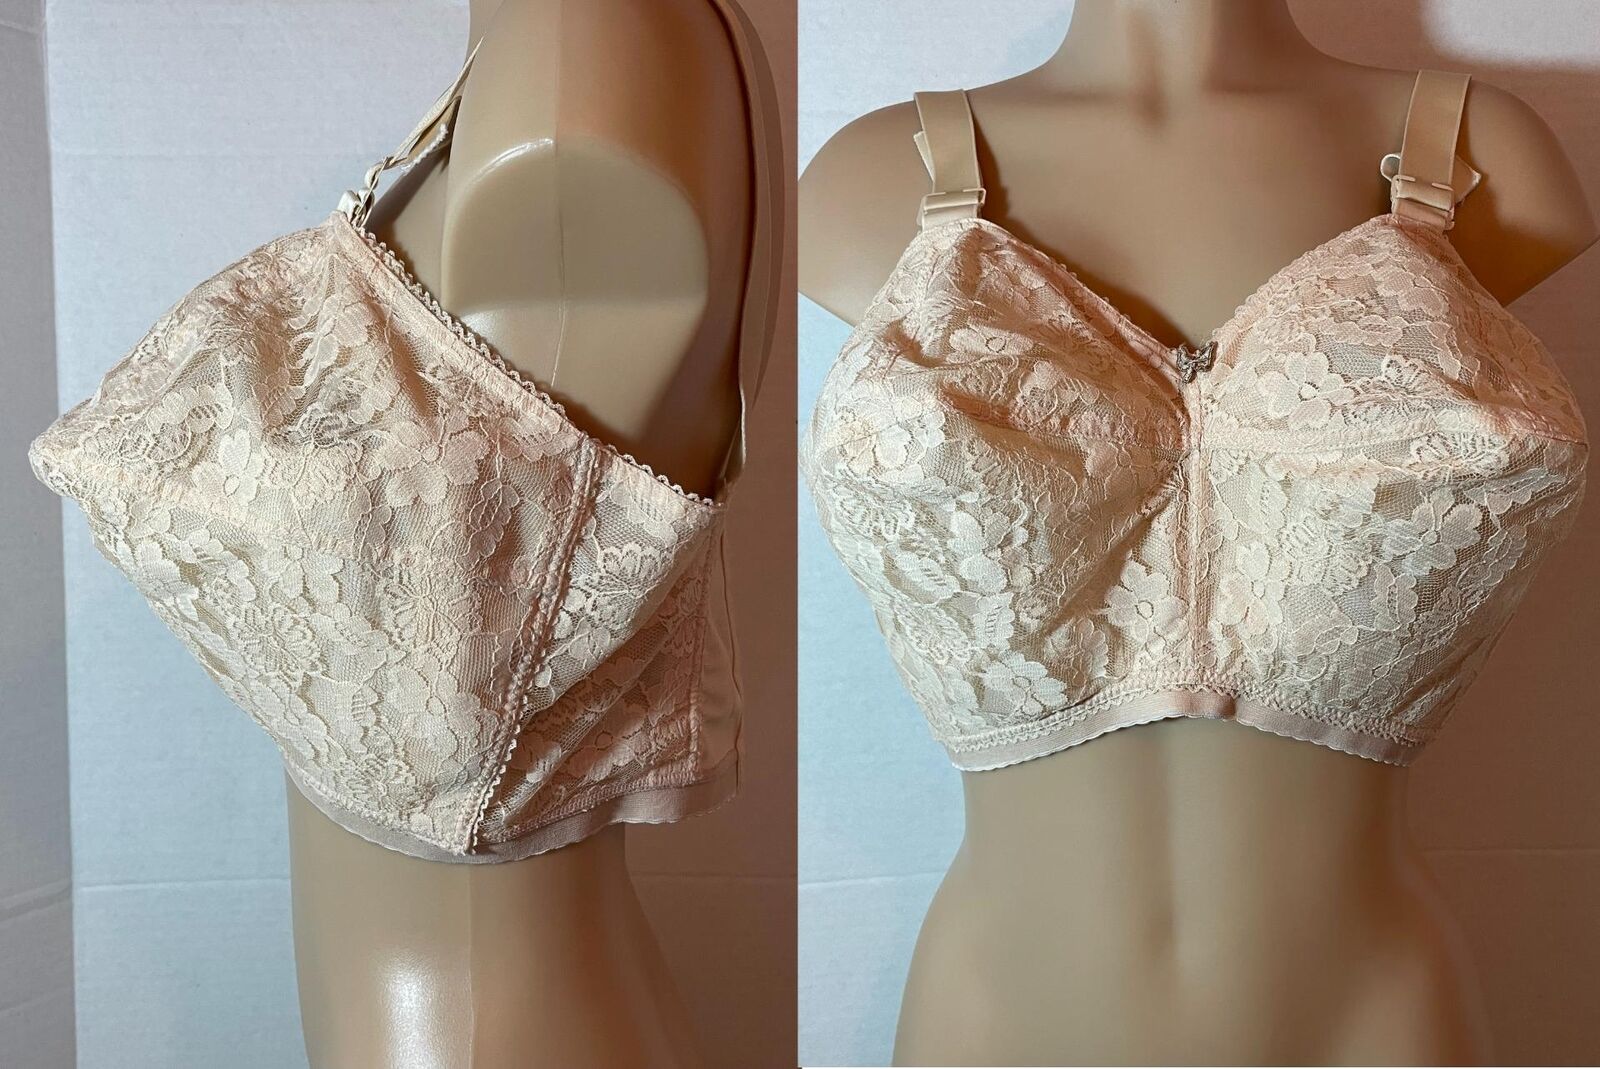 Vtg Lady Cameo BULLET Pointy Bra 34KK Wire-free Beige Floral Lace